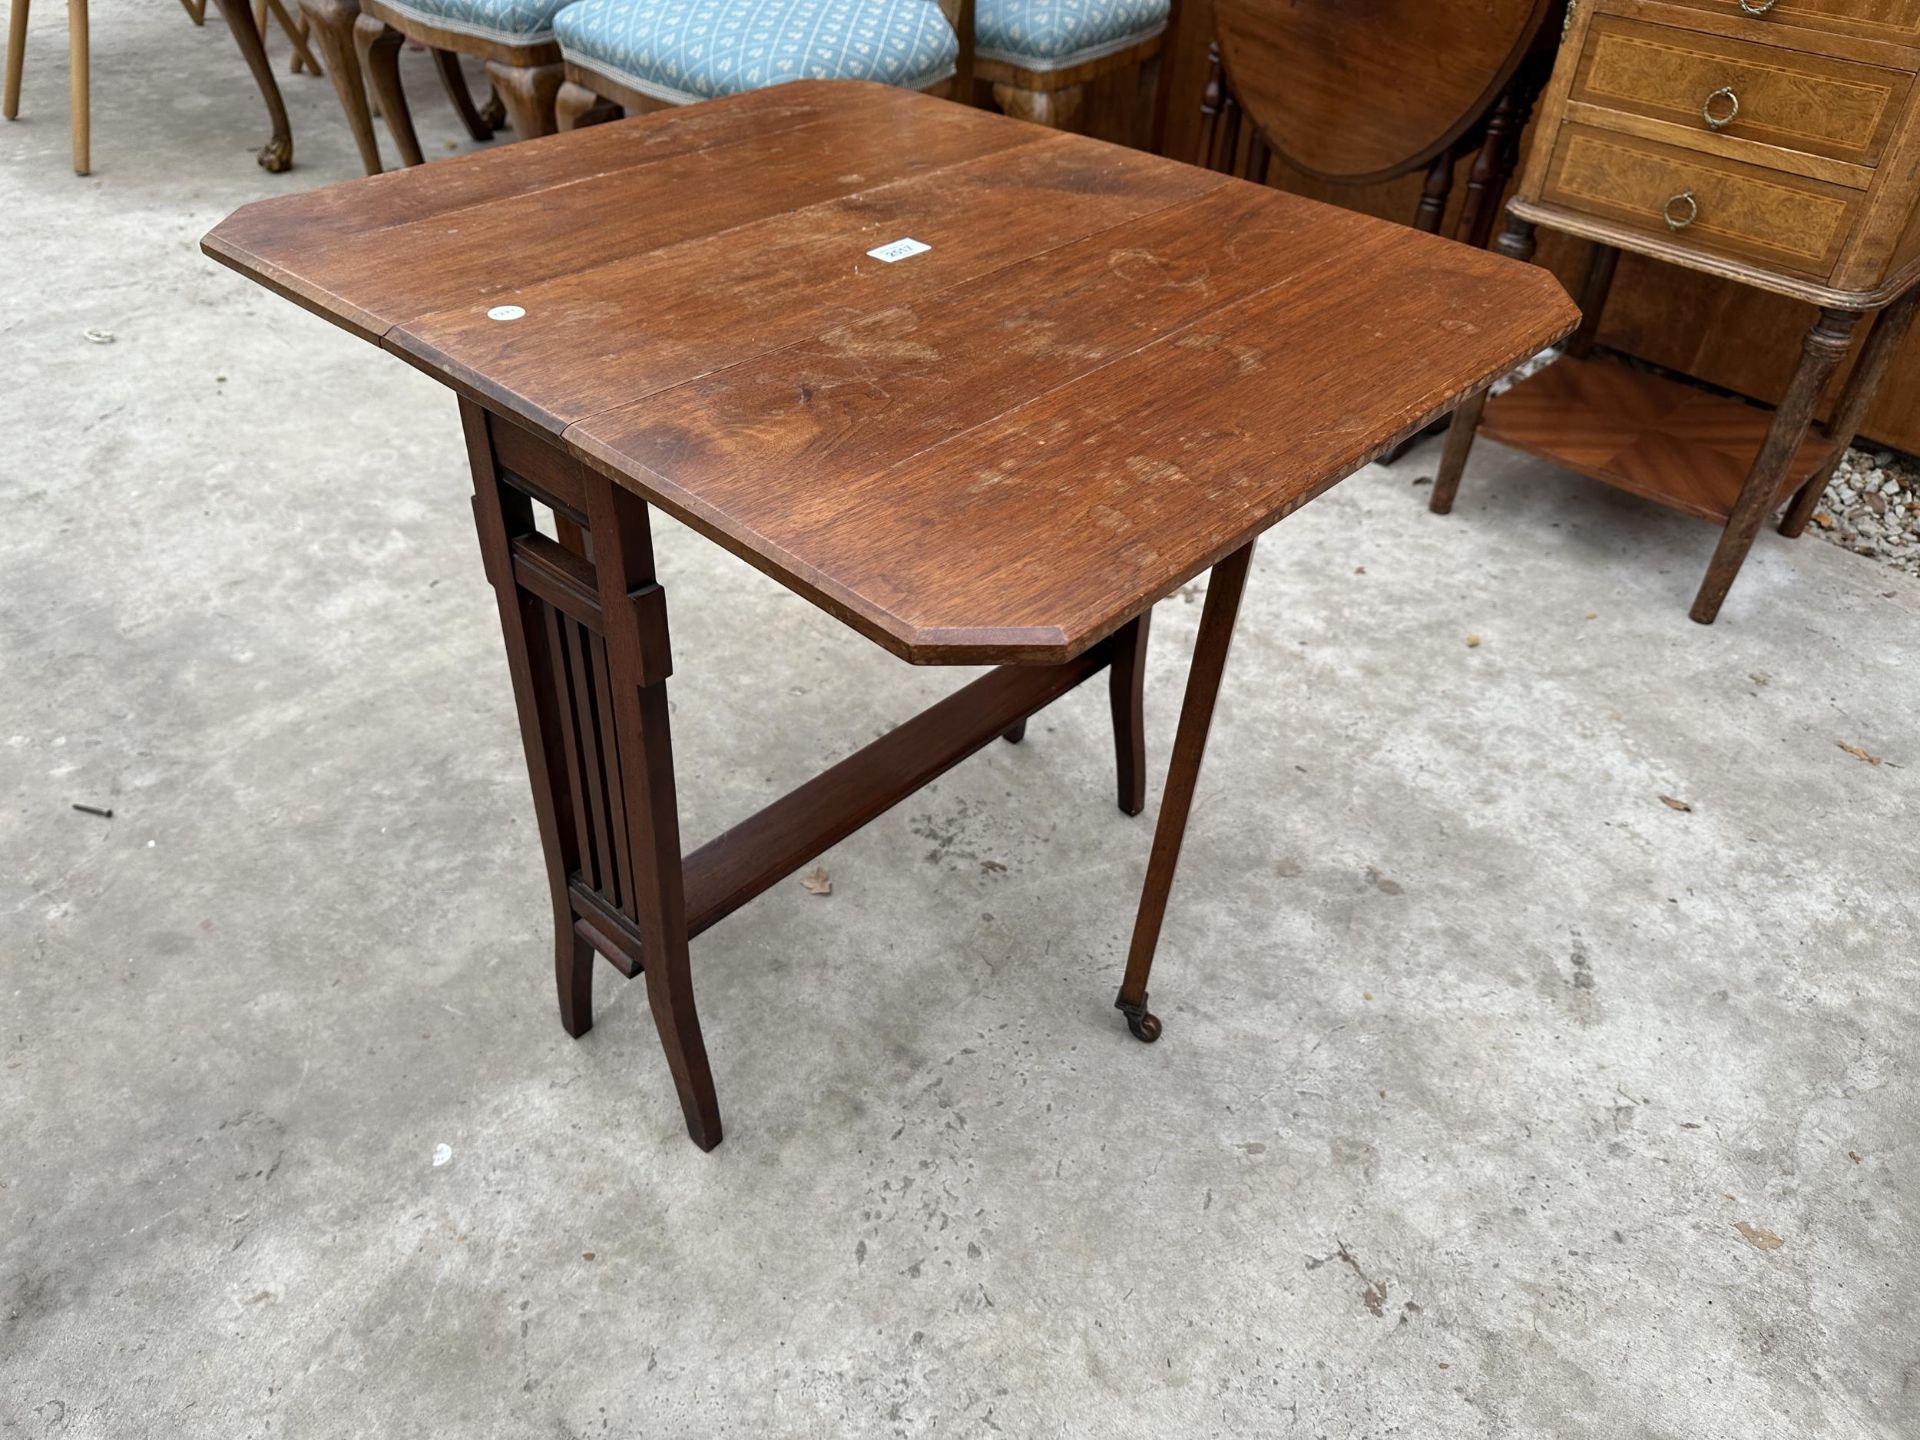 A LATE VICTORIAN SUTHERLAND TABLE WITH CANTED CORNERS 28.5" X 24" OPENED